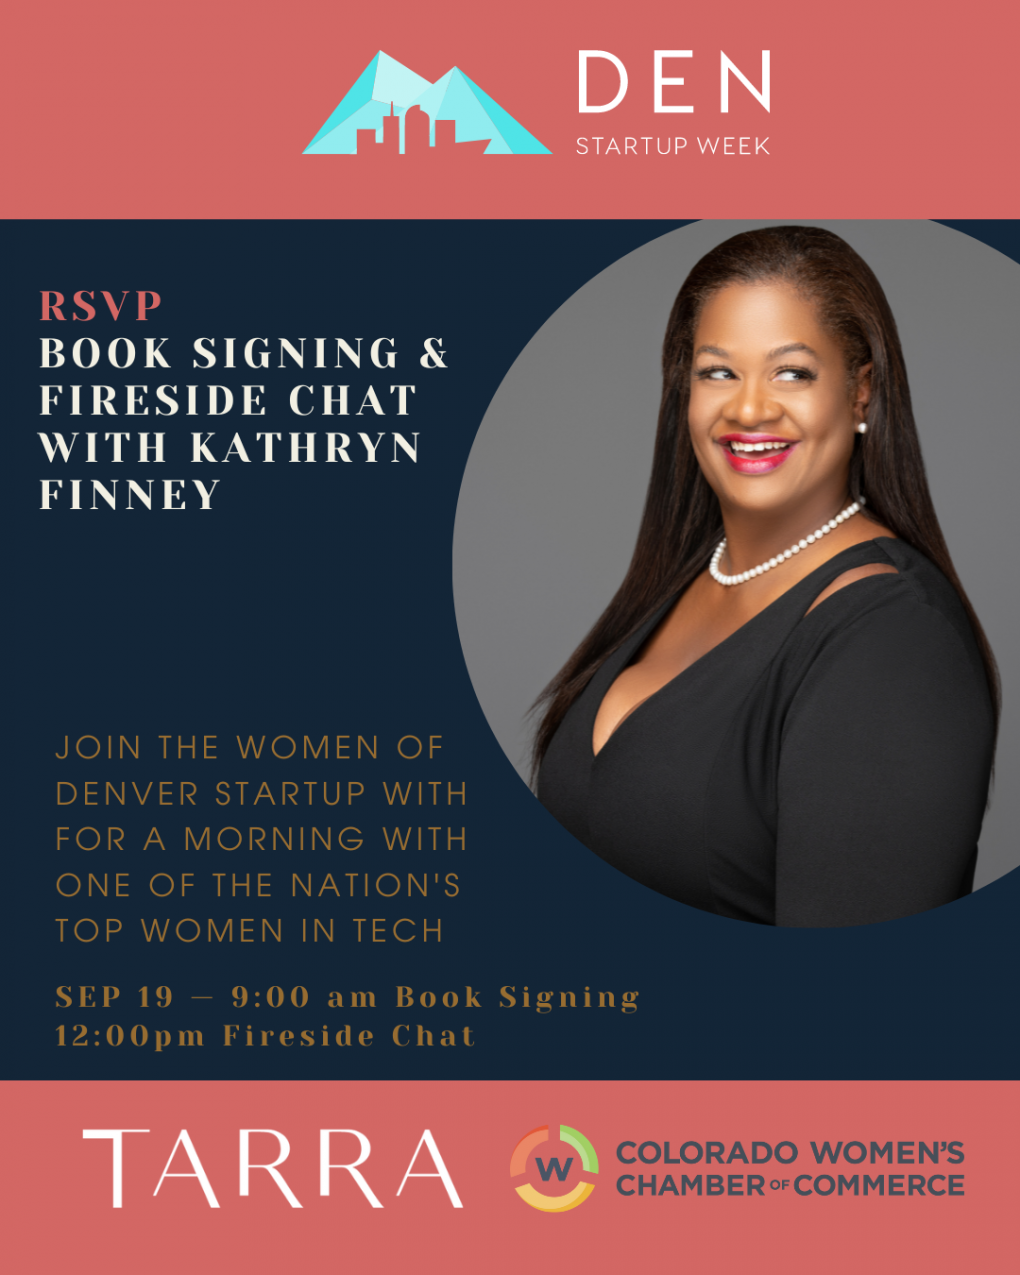 Fireside Chat and Book Signing with Kathryn Finney